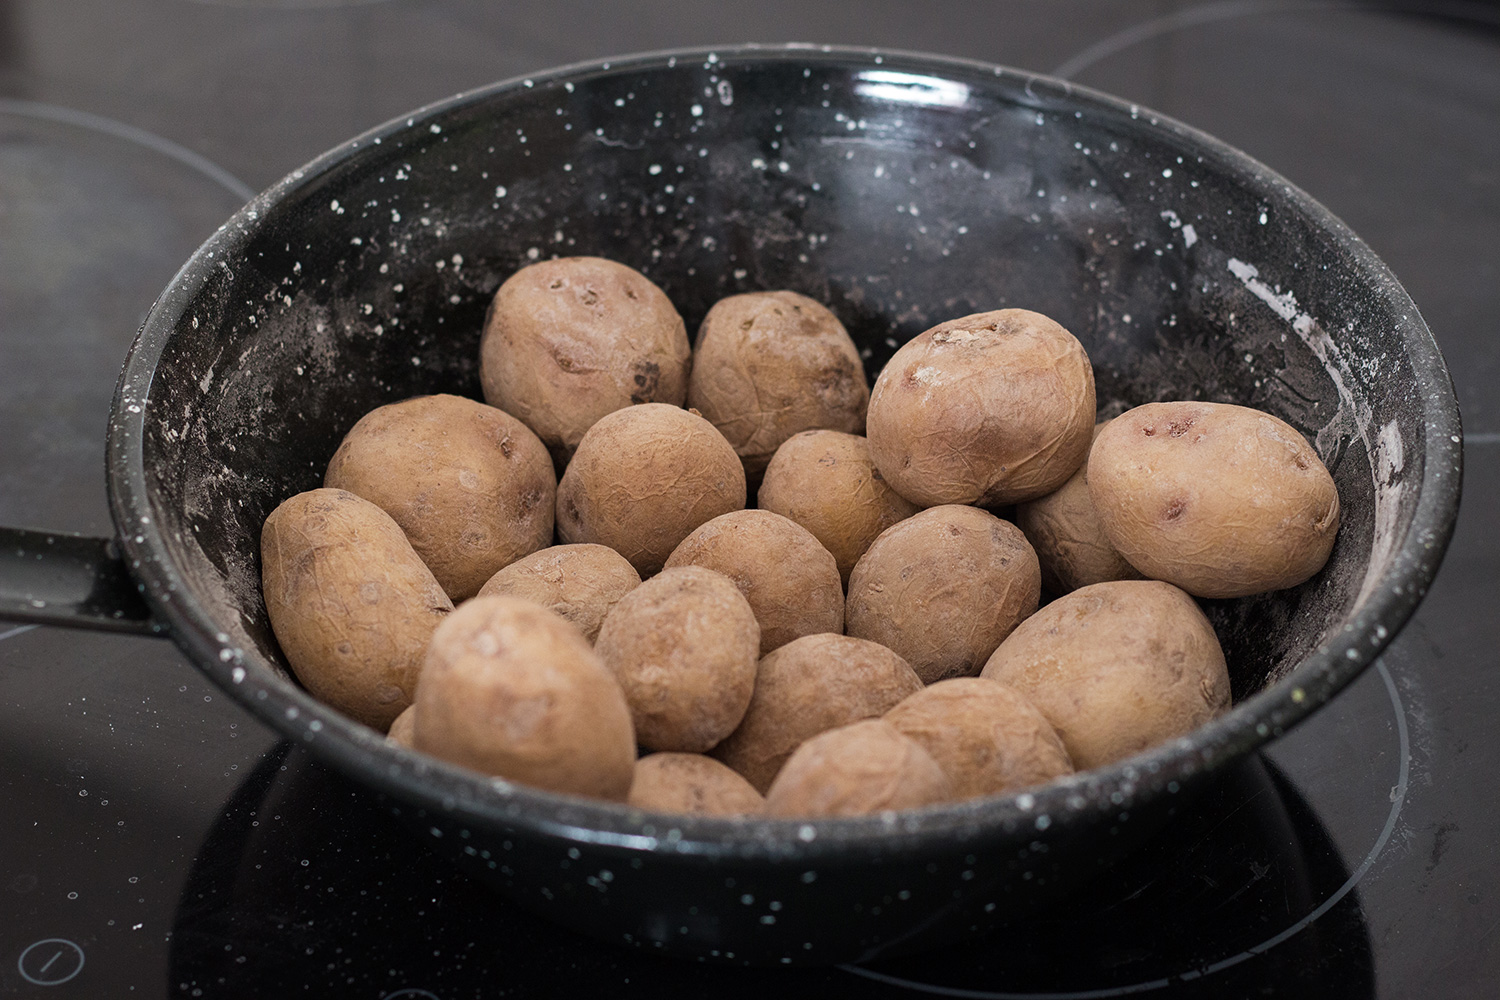 Canarian Wrinkly Potatoes (Papas Arrugadas) make a perfect side dish to any meal. They are really easy to make and require only 2 ingredients! | cookingtheglobe.com